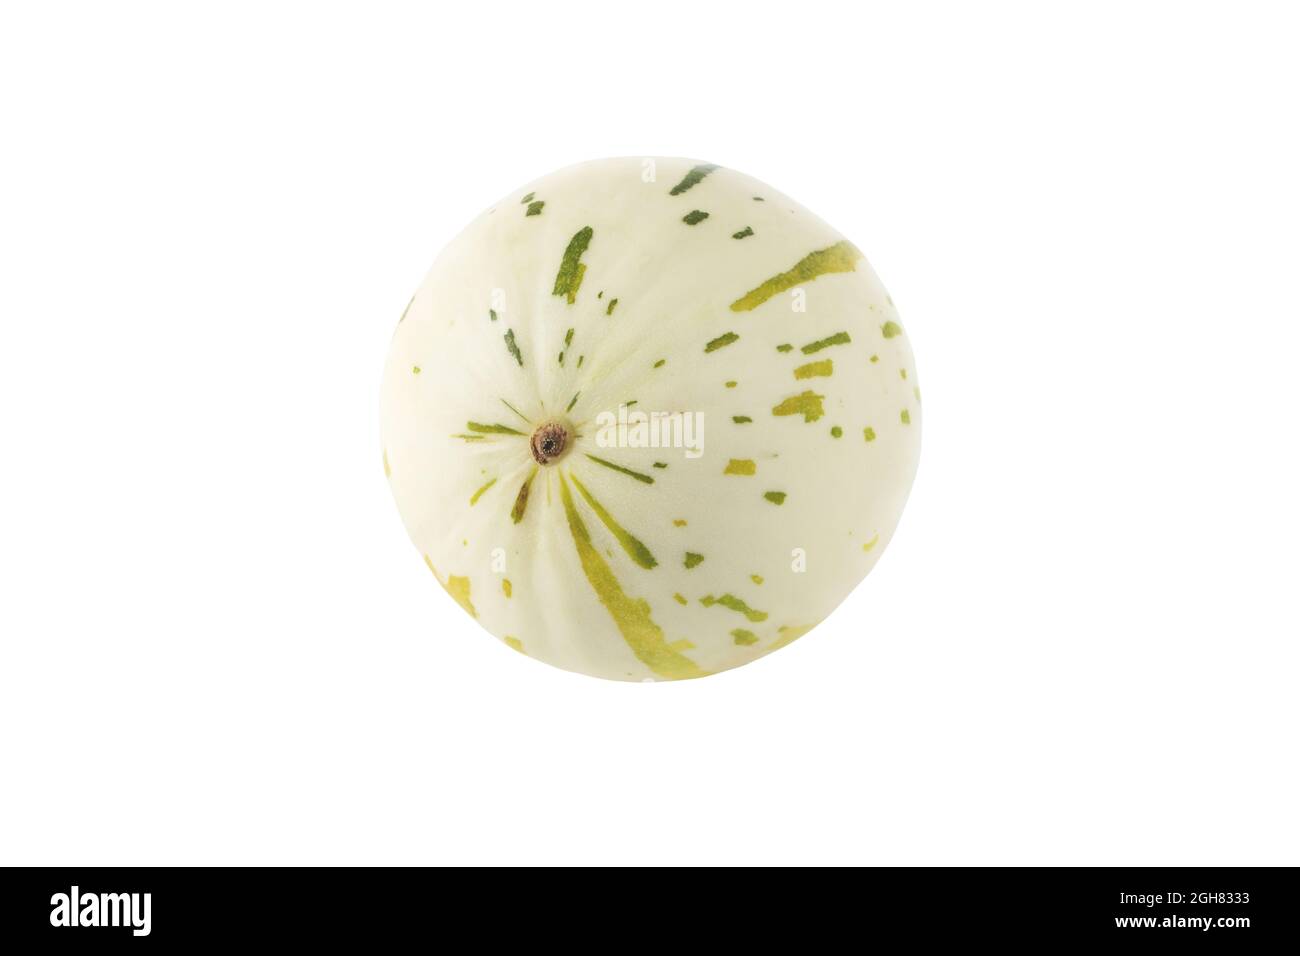 Ivory gaya melon with green and yellow dashed striations and flecks isolated on white. Colorful ripe fruit. Stock Photo